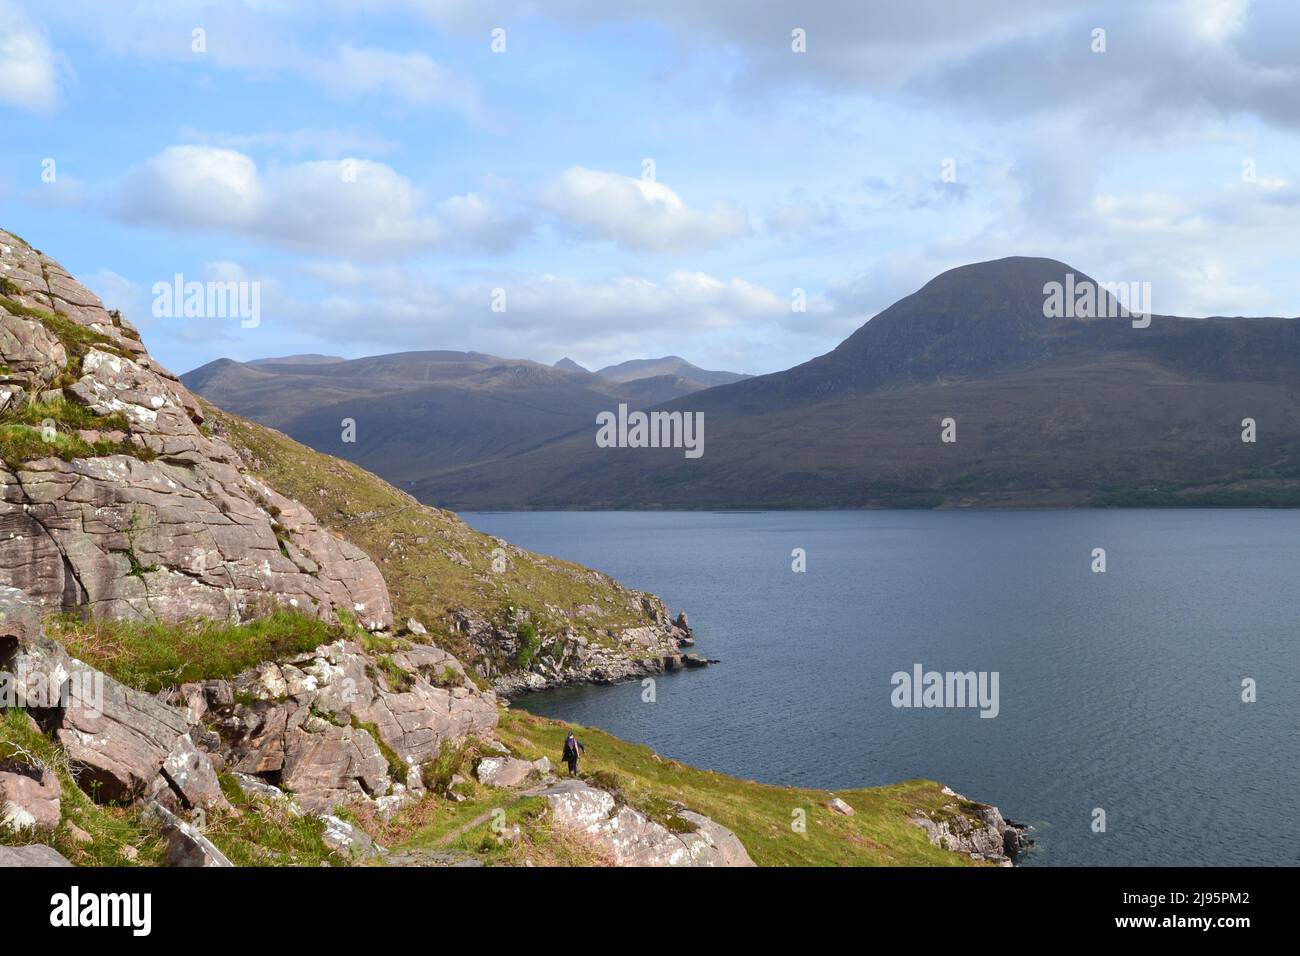 Little Loch Bloom in NW Scotland, Ross & Cromarty, overlooked by mountains Sail Mhor and further giant An Teallach. Mid May. Beautiful calm scenery Stock Photo